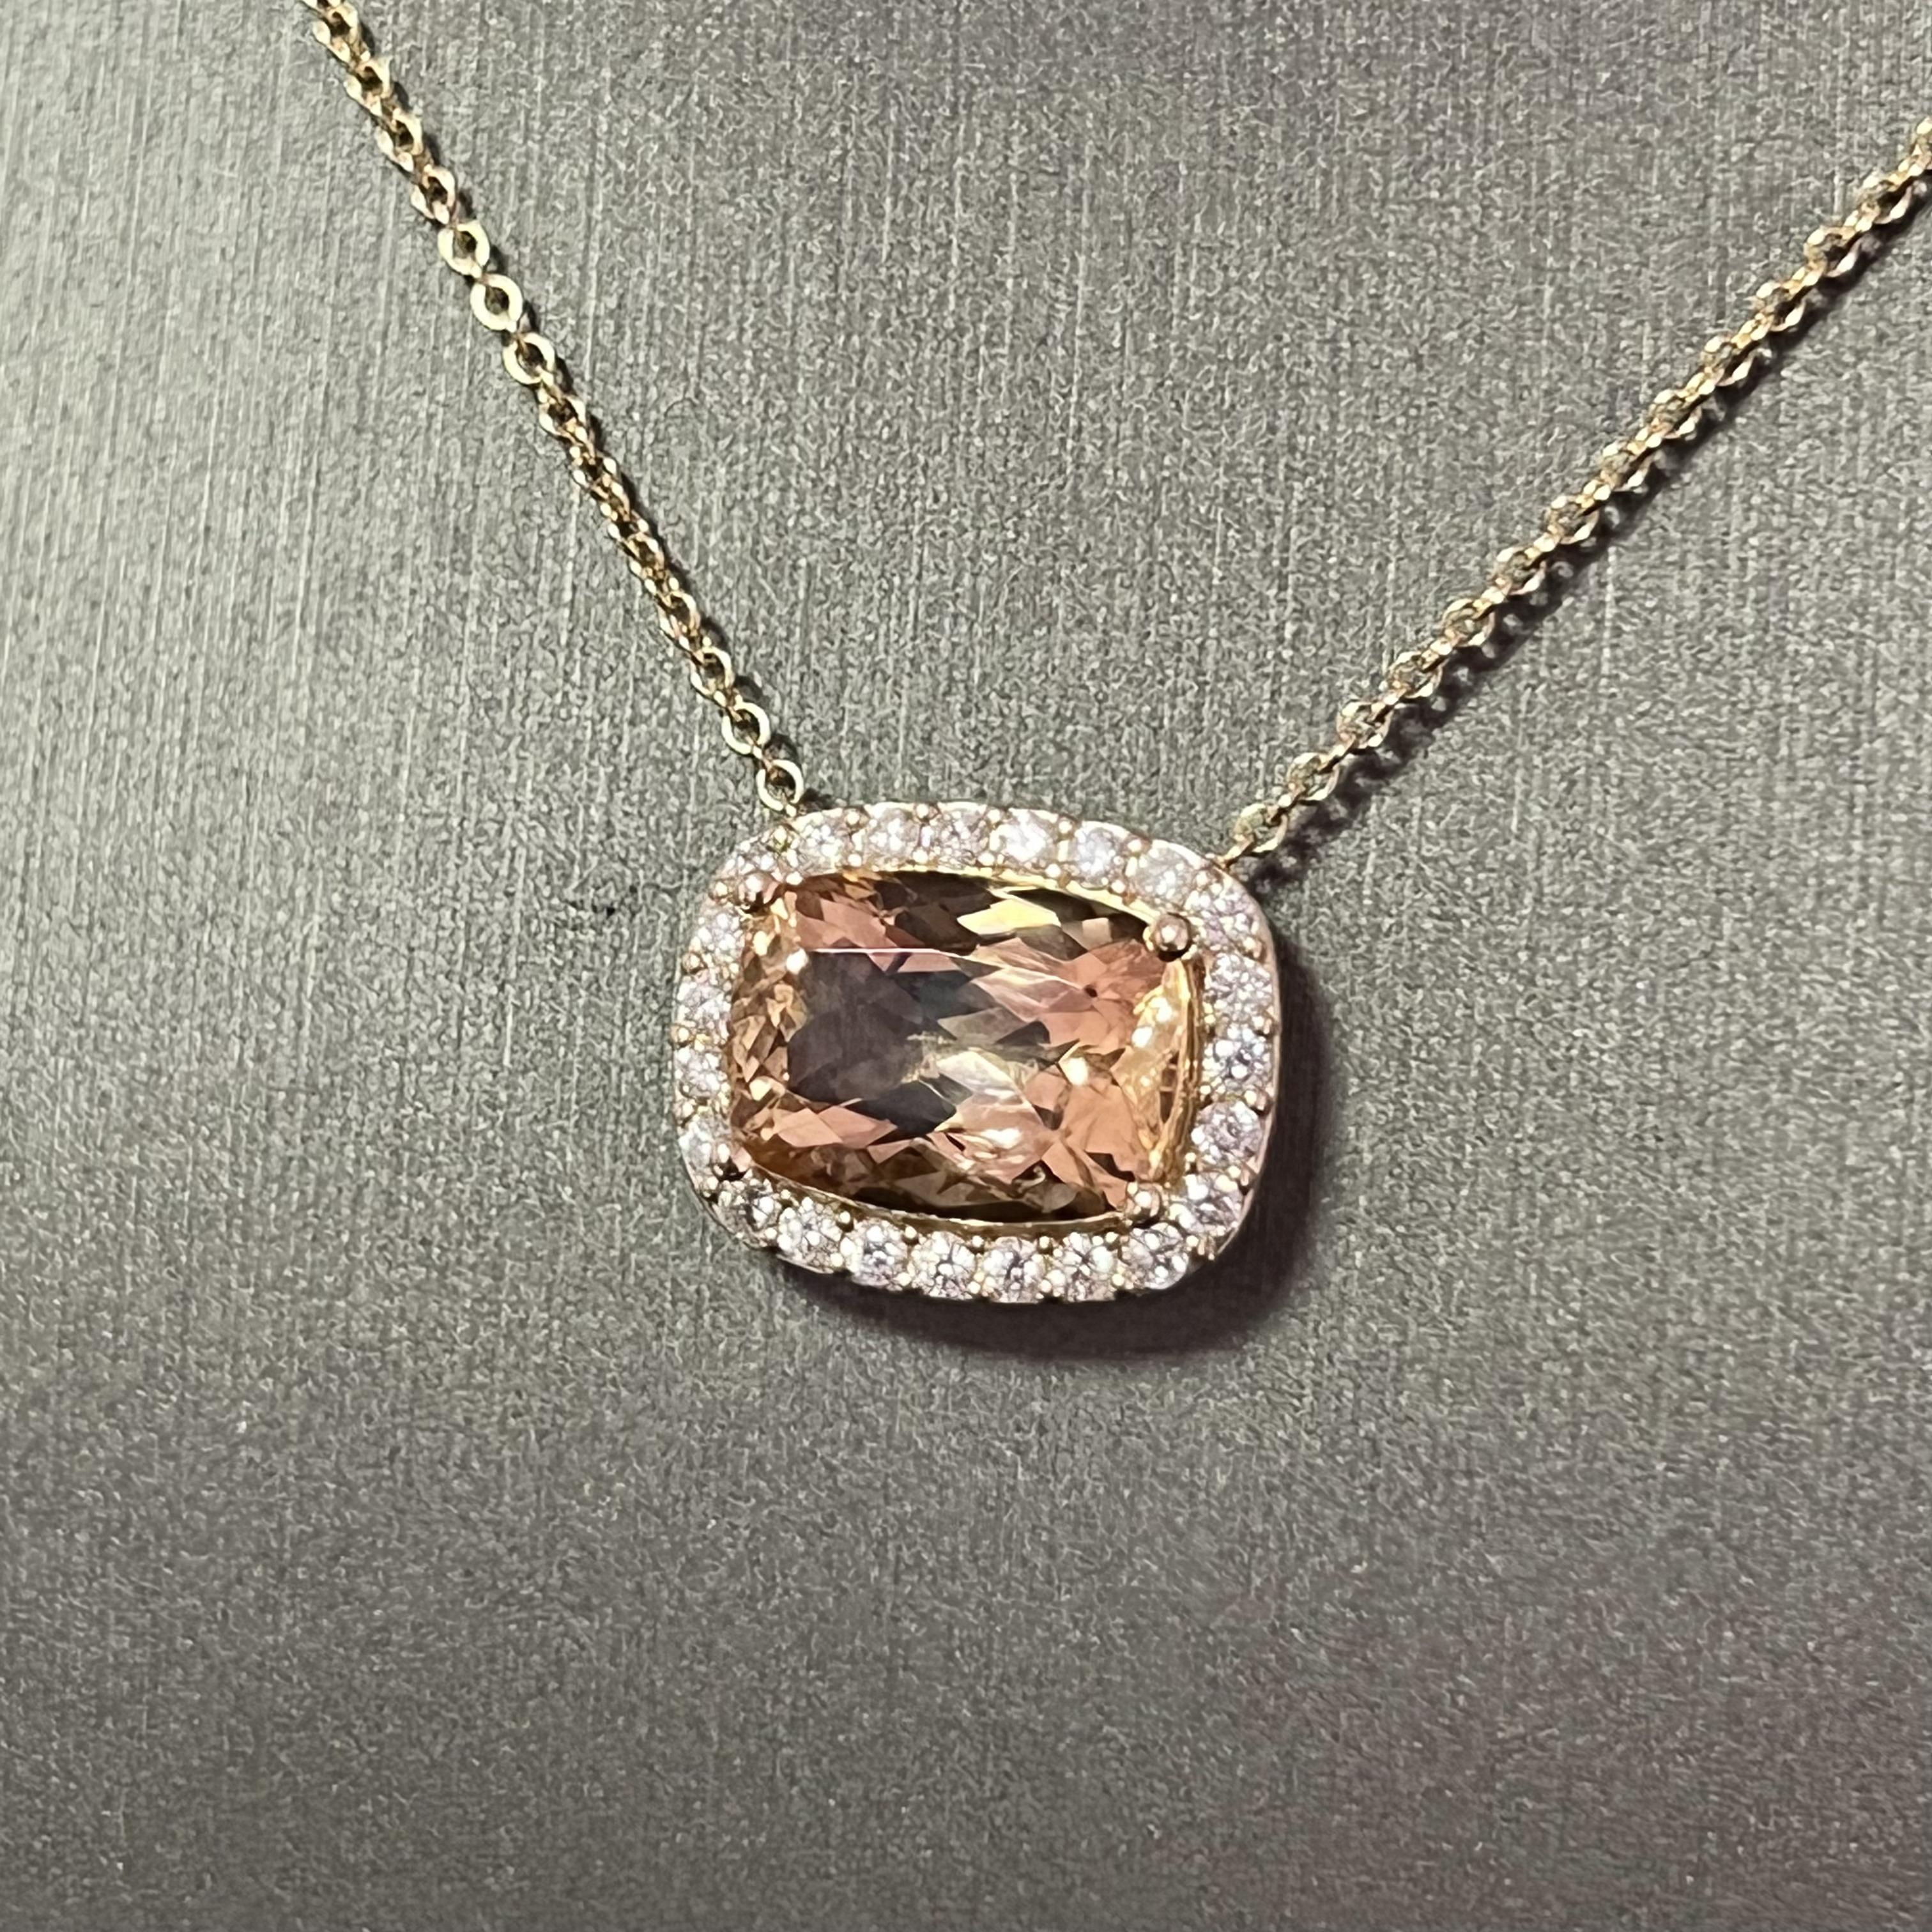 Diamond Morganite Pendant Necklace 14k Gold 7.35 TCW Certified For Sale 5